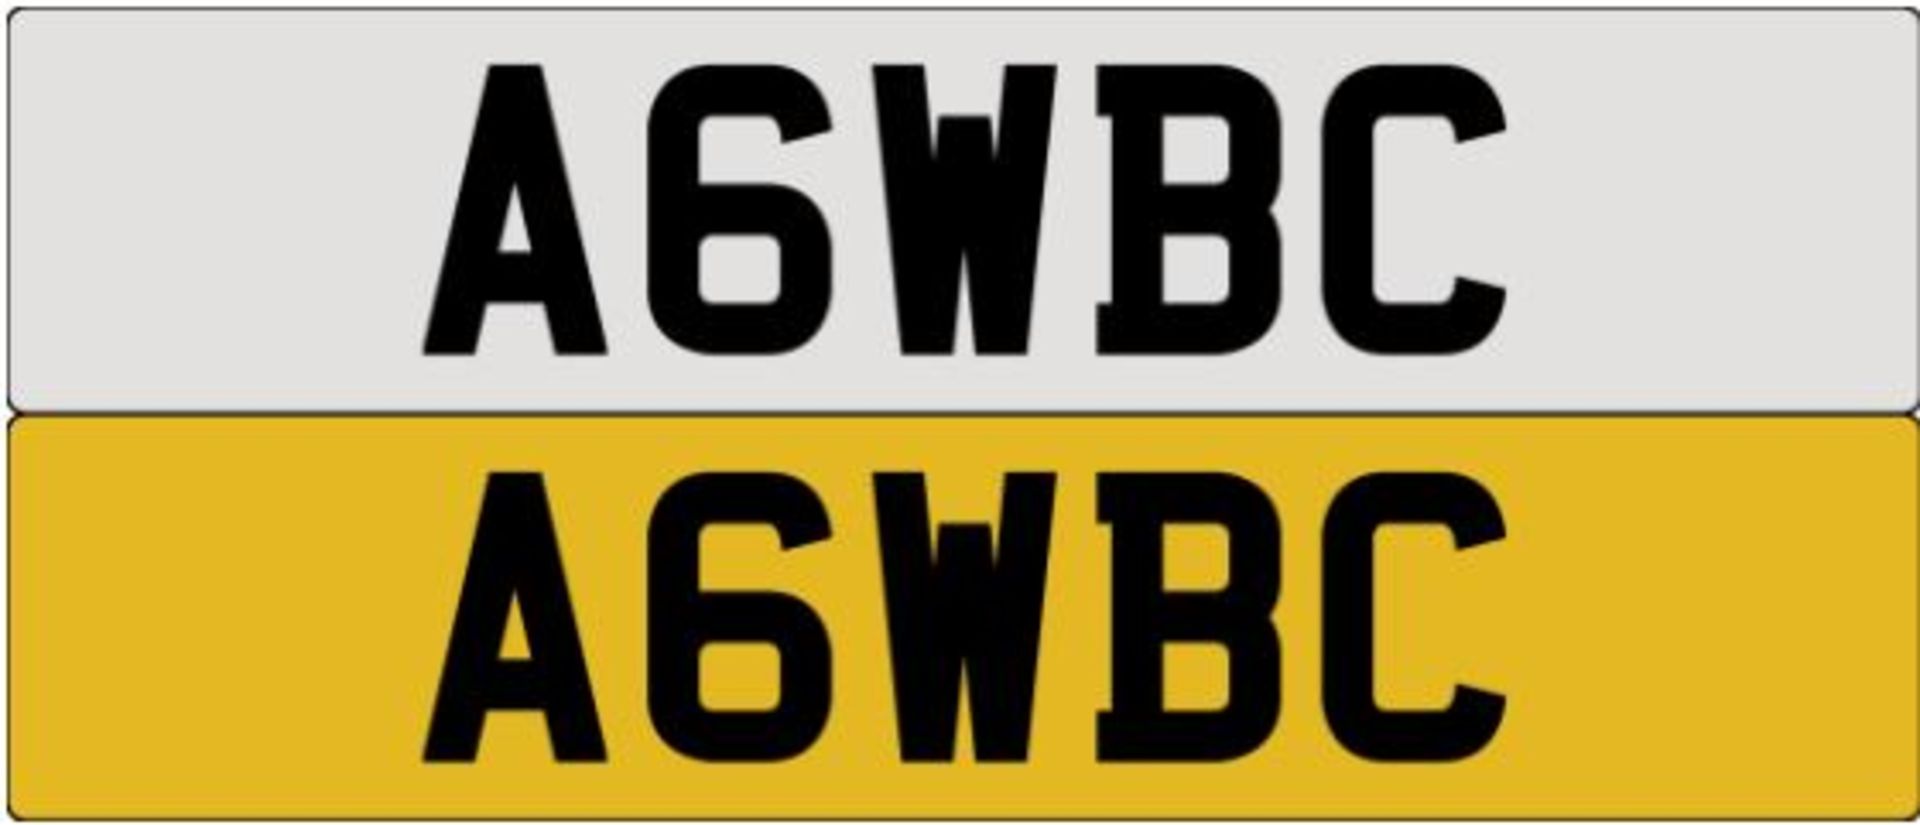 Registration Number A6WBC. A Transfer Fee of £80 is payable on top of a winning auction bid by the